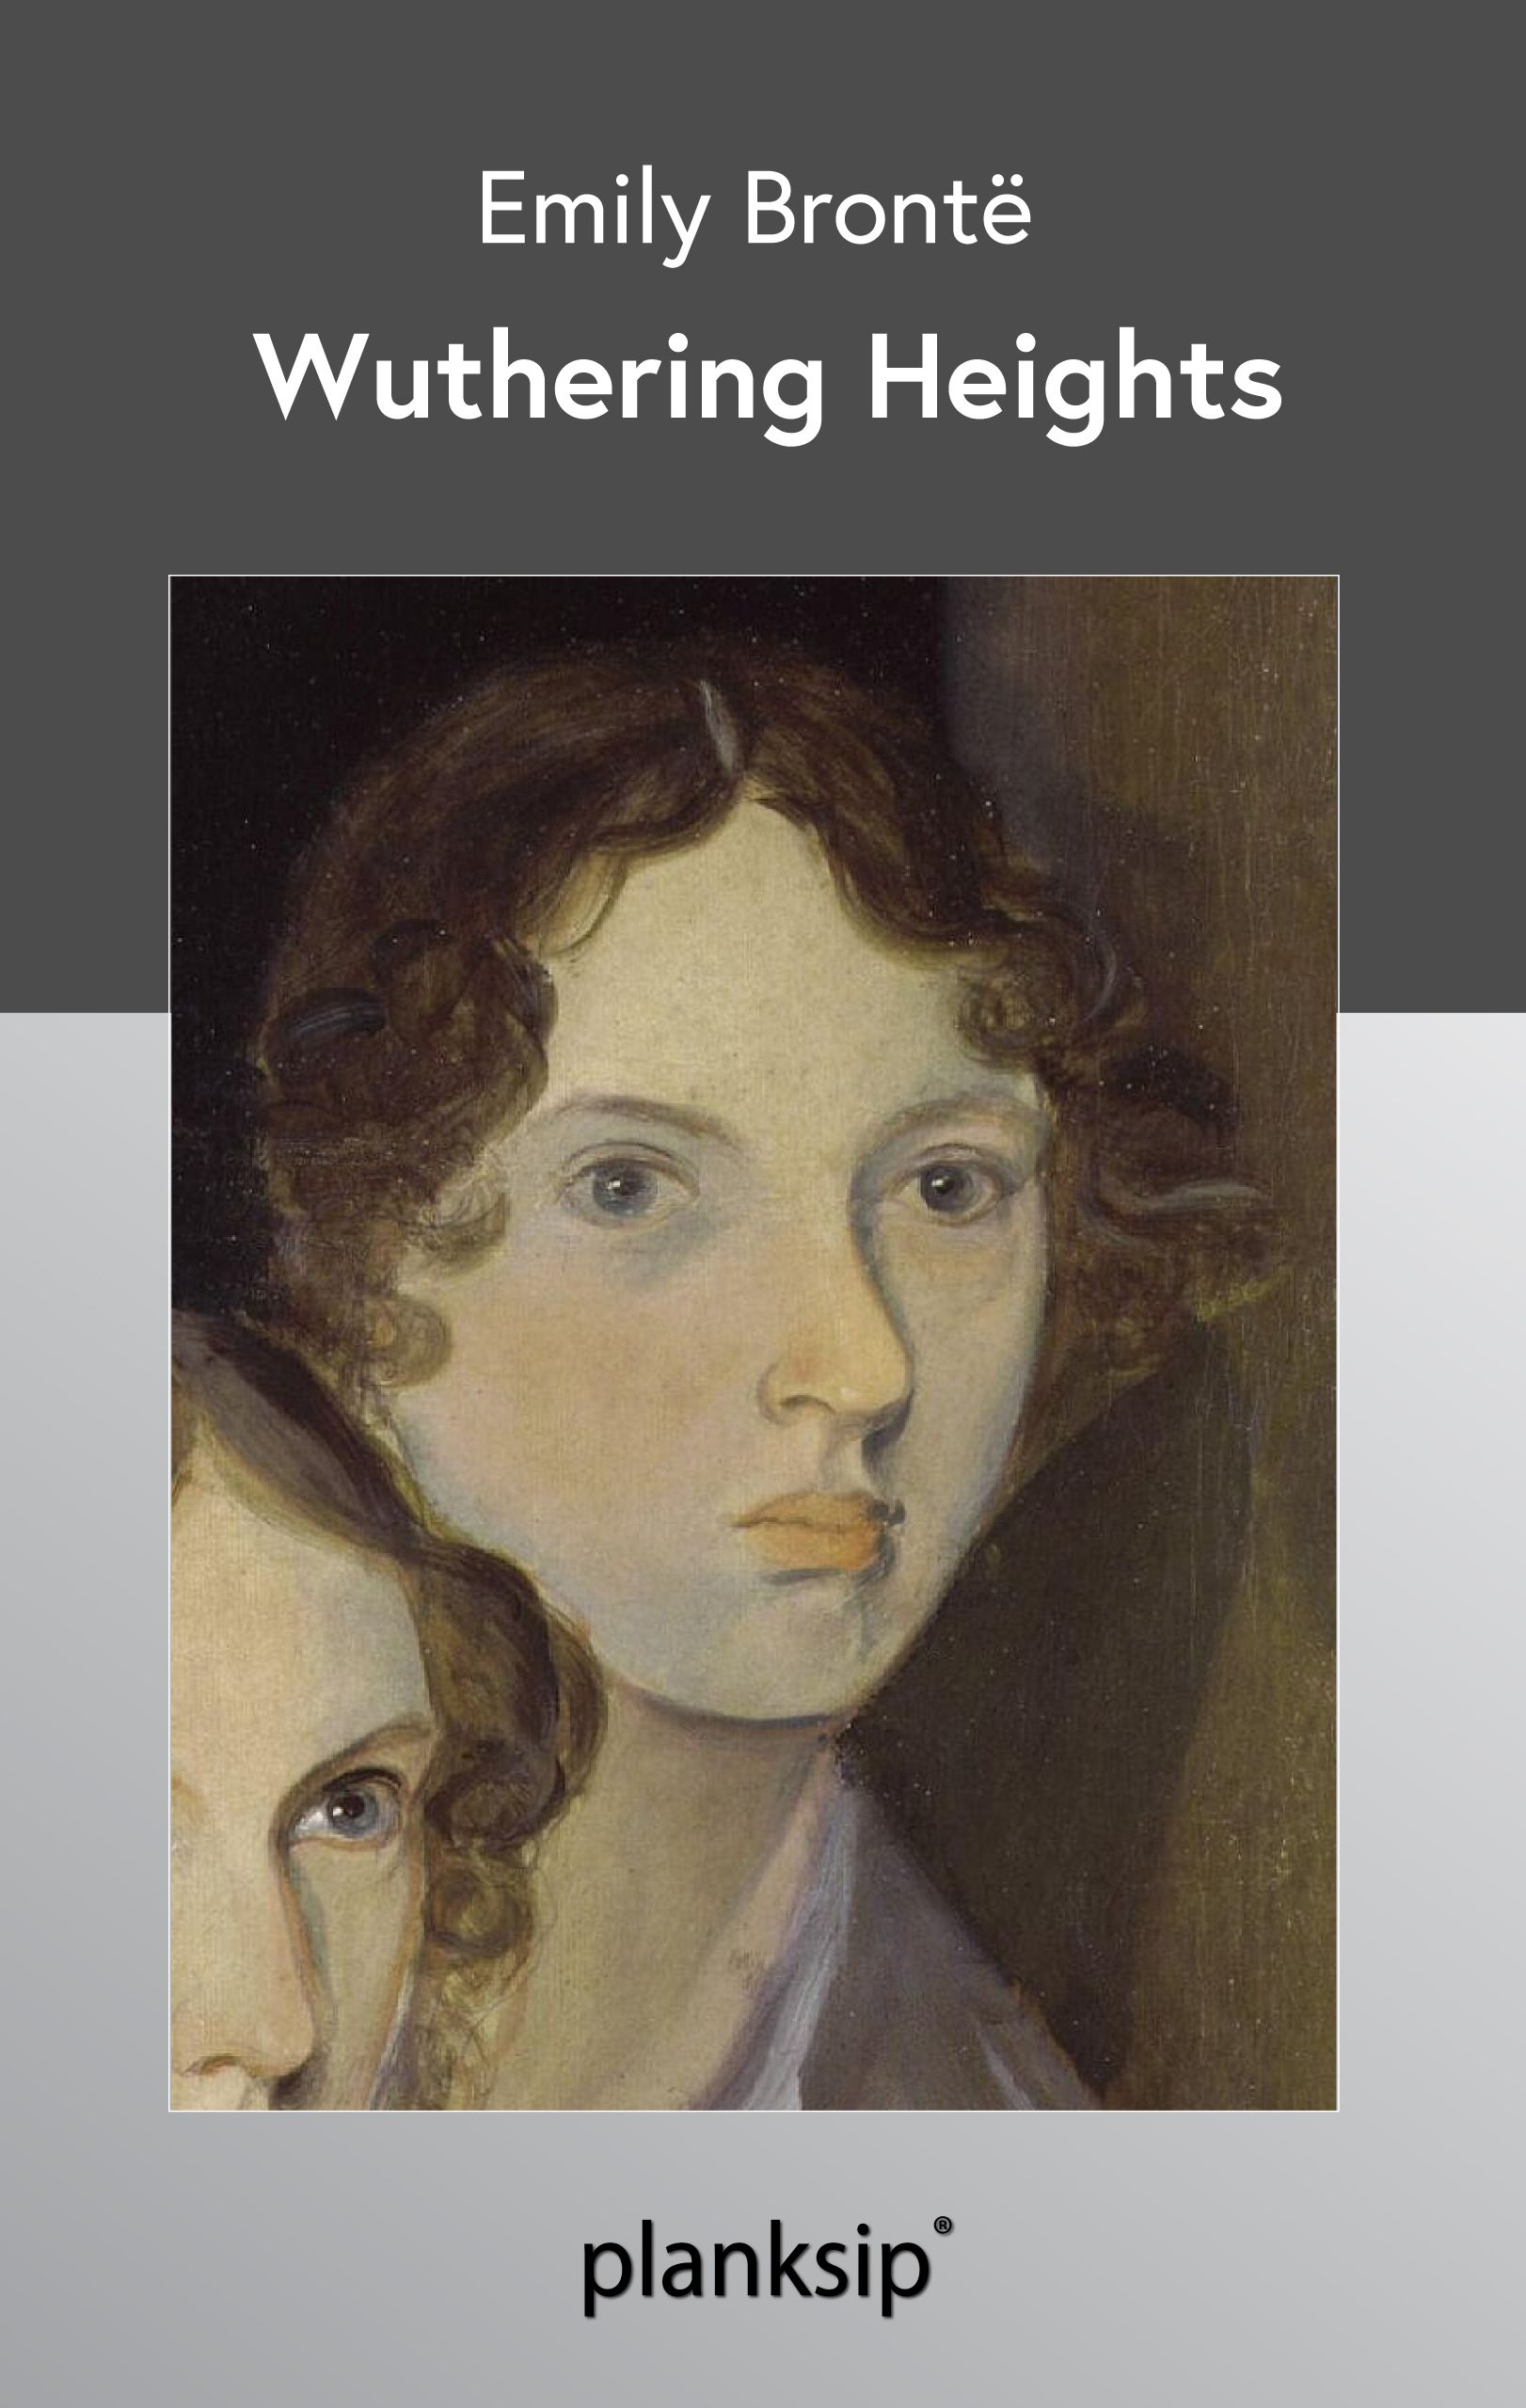 Wuthering Heights by Emily Brontë (REVIEW)